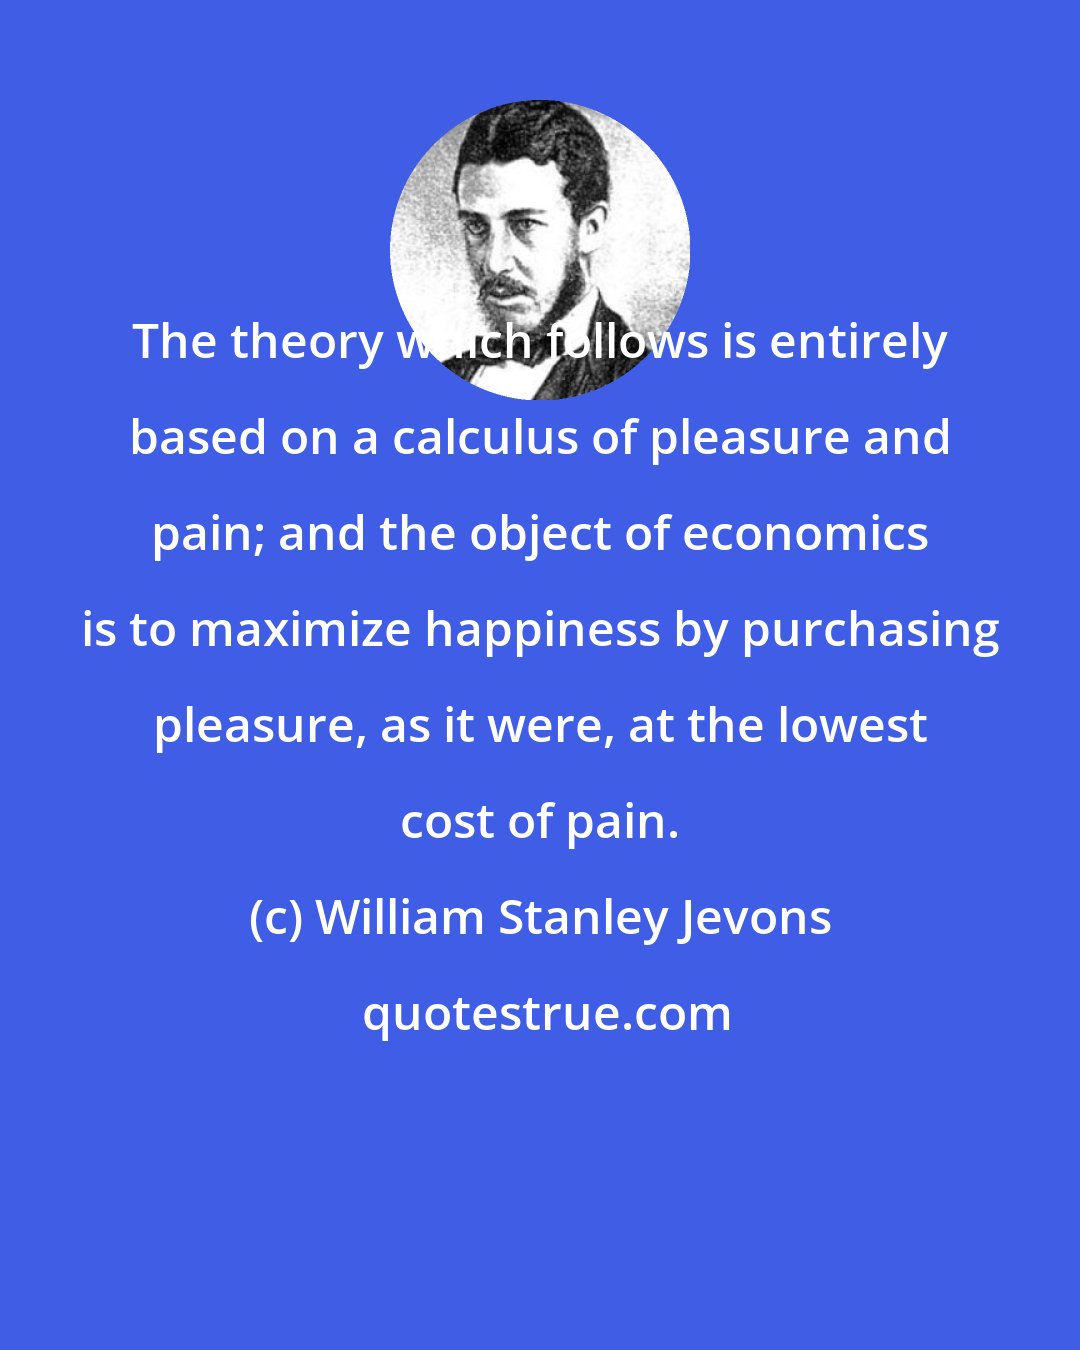 William Stanley Jevons: The theory which follows is entirely based on a calculus of pleasure and pain; and the object of economics is to maximize happiness by purchasing pleasure, as it were, at the lowest cost of pain.